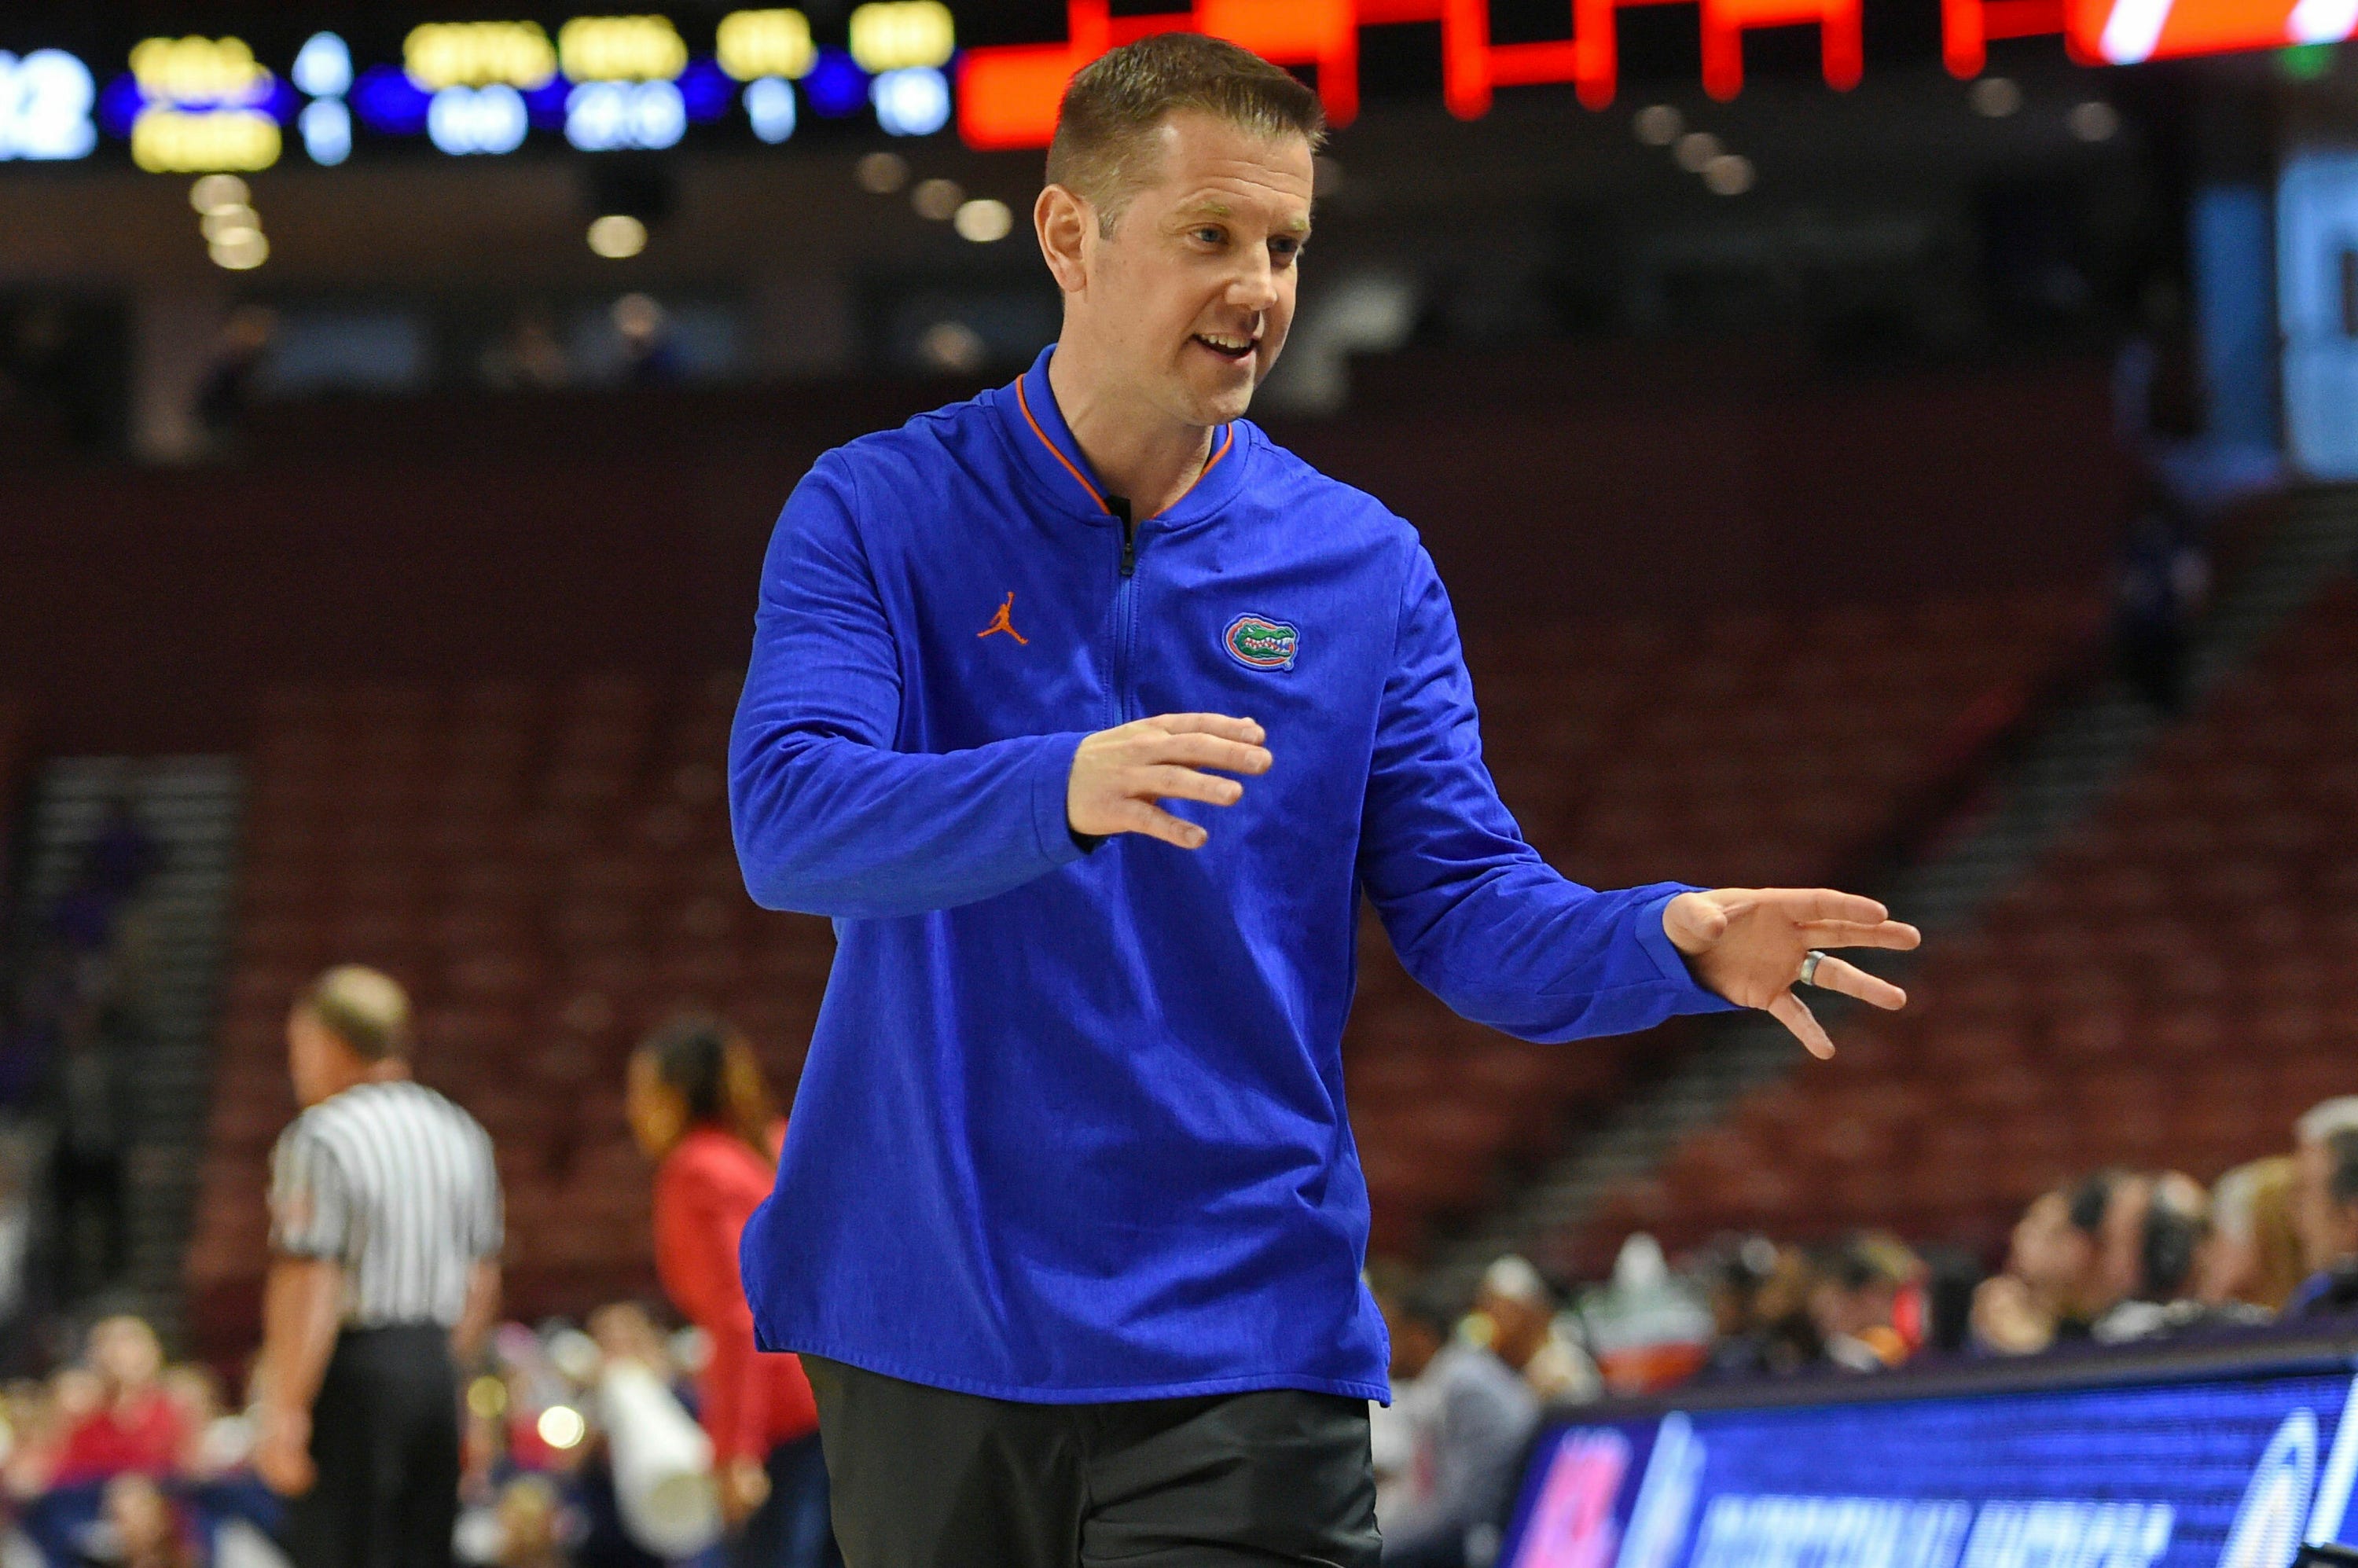 Ex-Florida coach Cameron Newbauer accused of abuse by former players